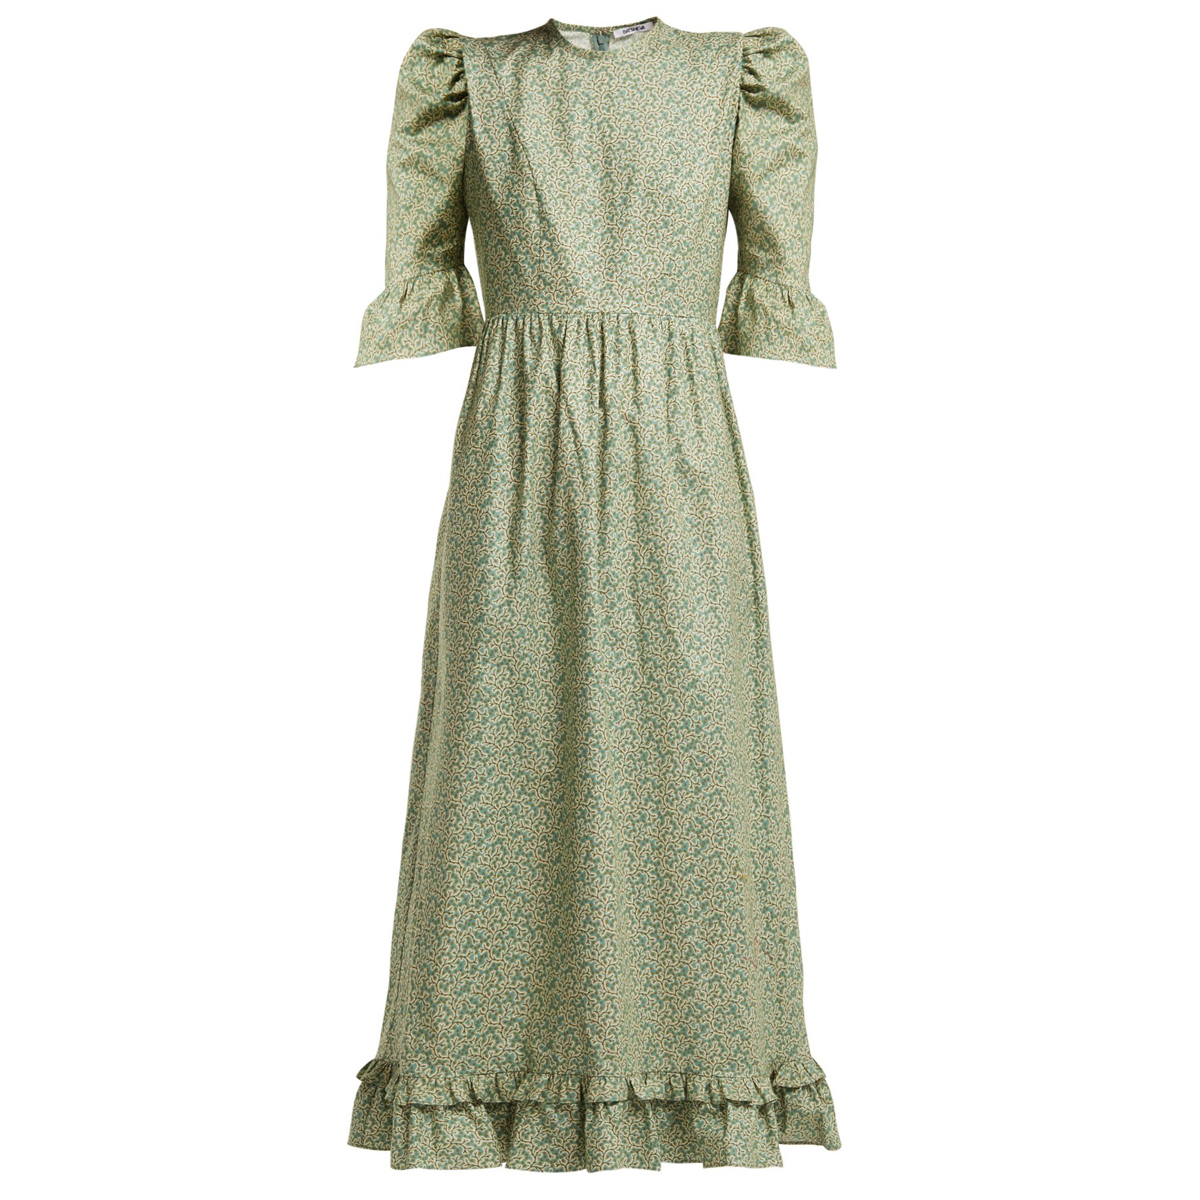 old fashioned women's clothing